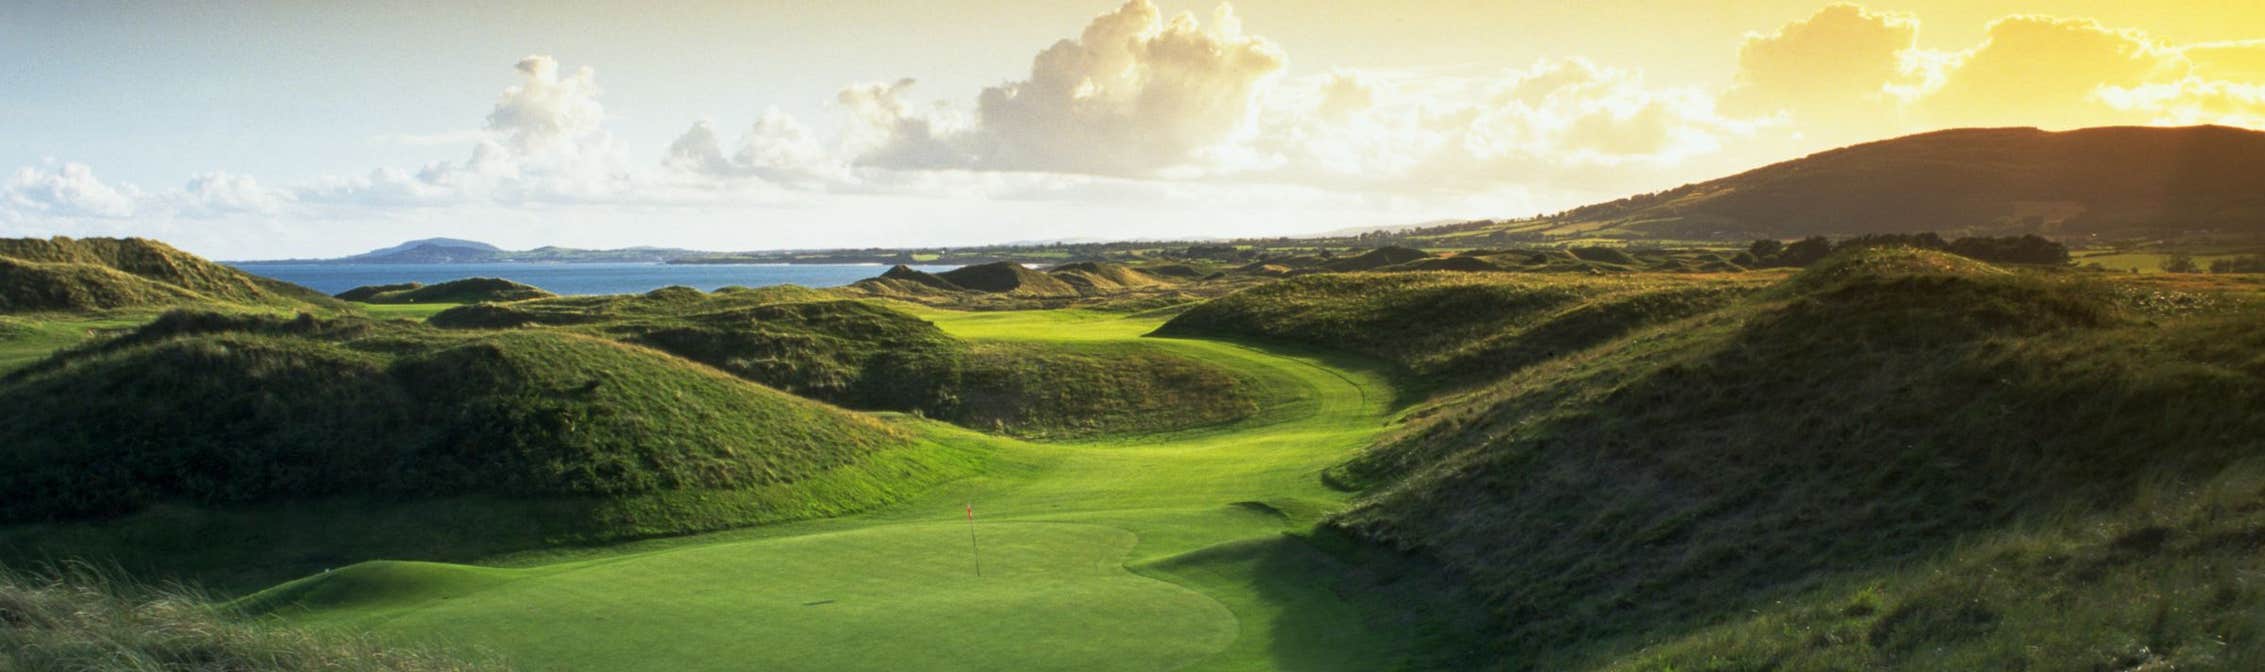 Image of the golf course in Brittas Bay in County Wicklow